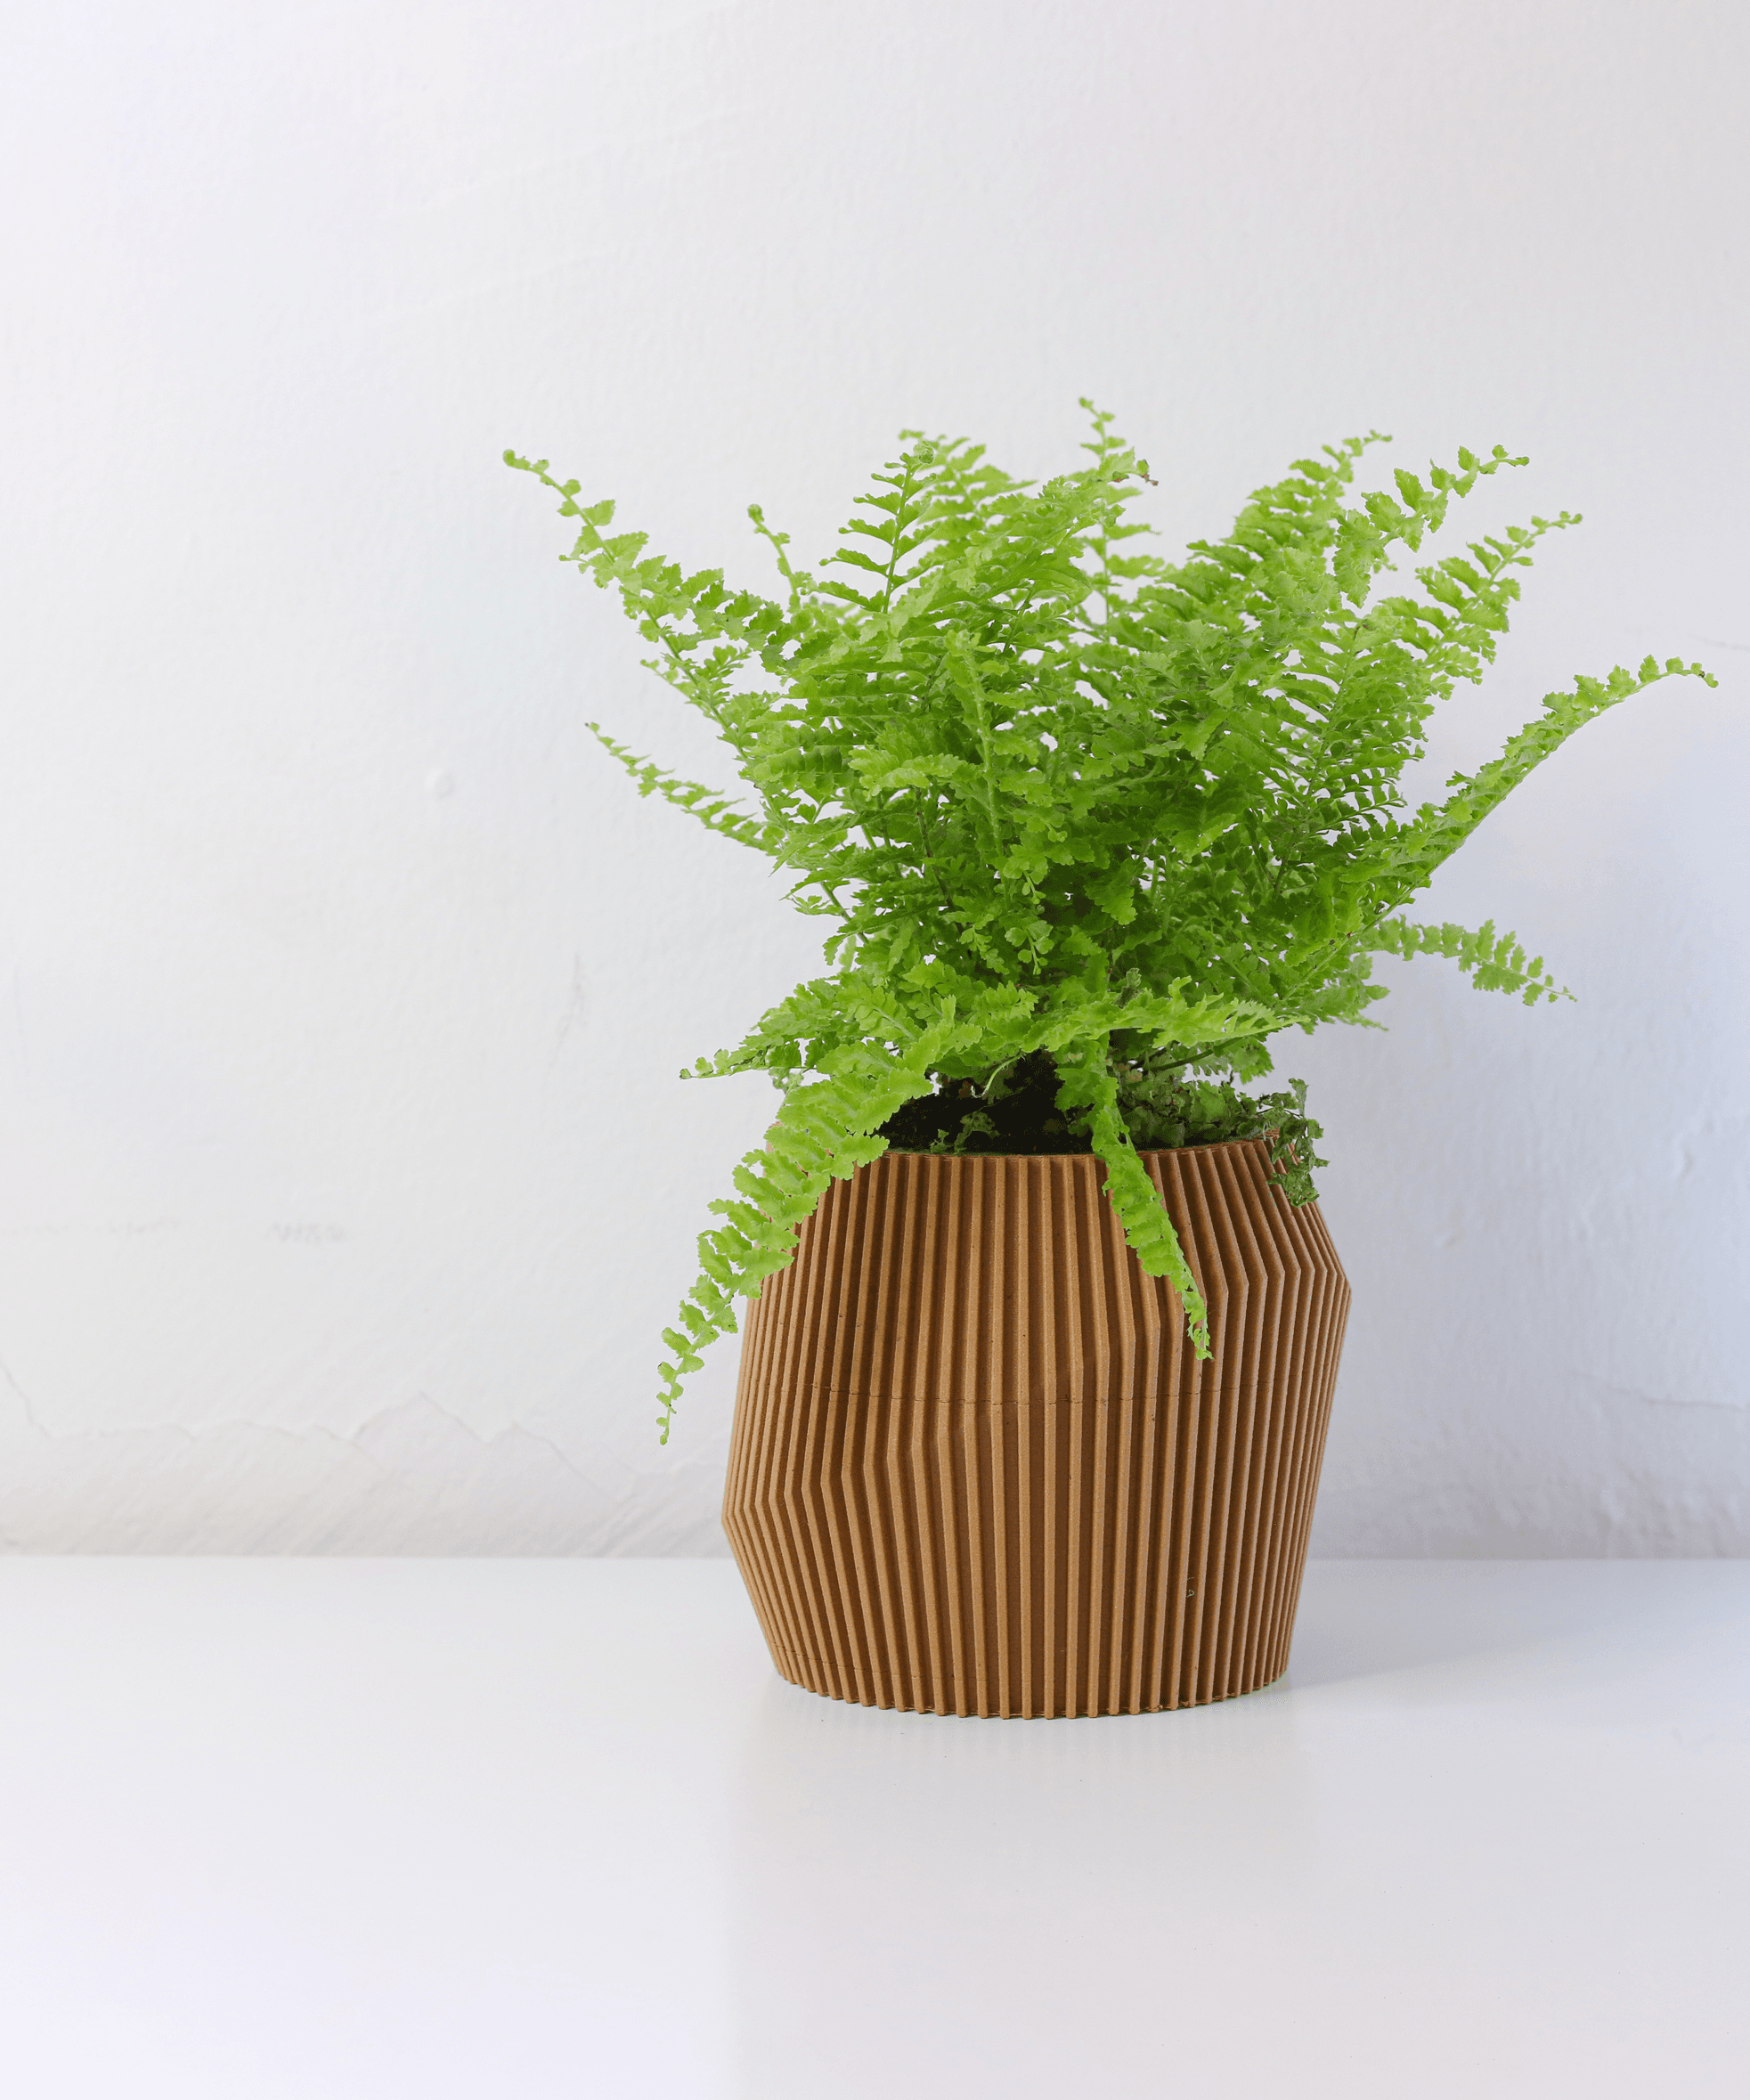 SELF WATERING PLANTER READY TO BE PRINTED IN WOOD PLA - WAVE 3d model